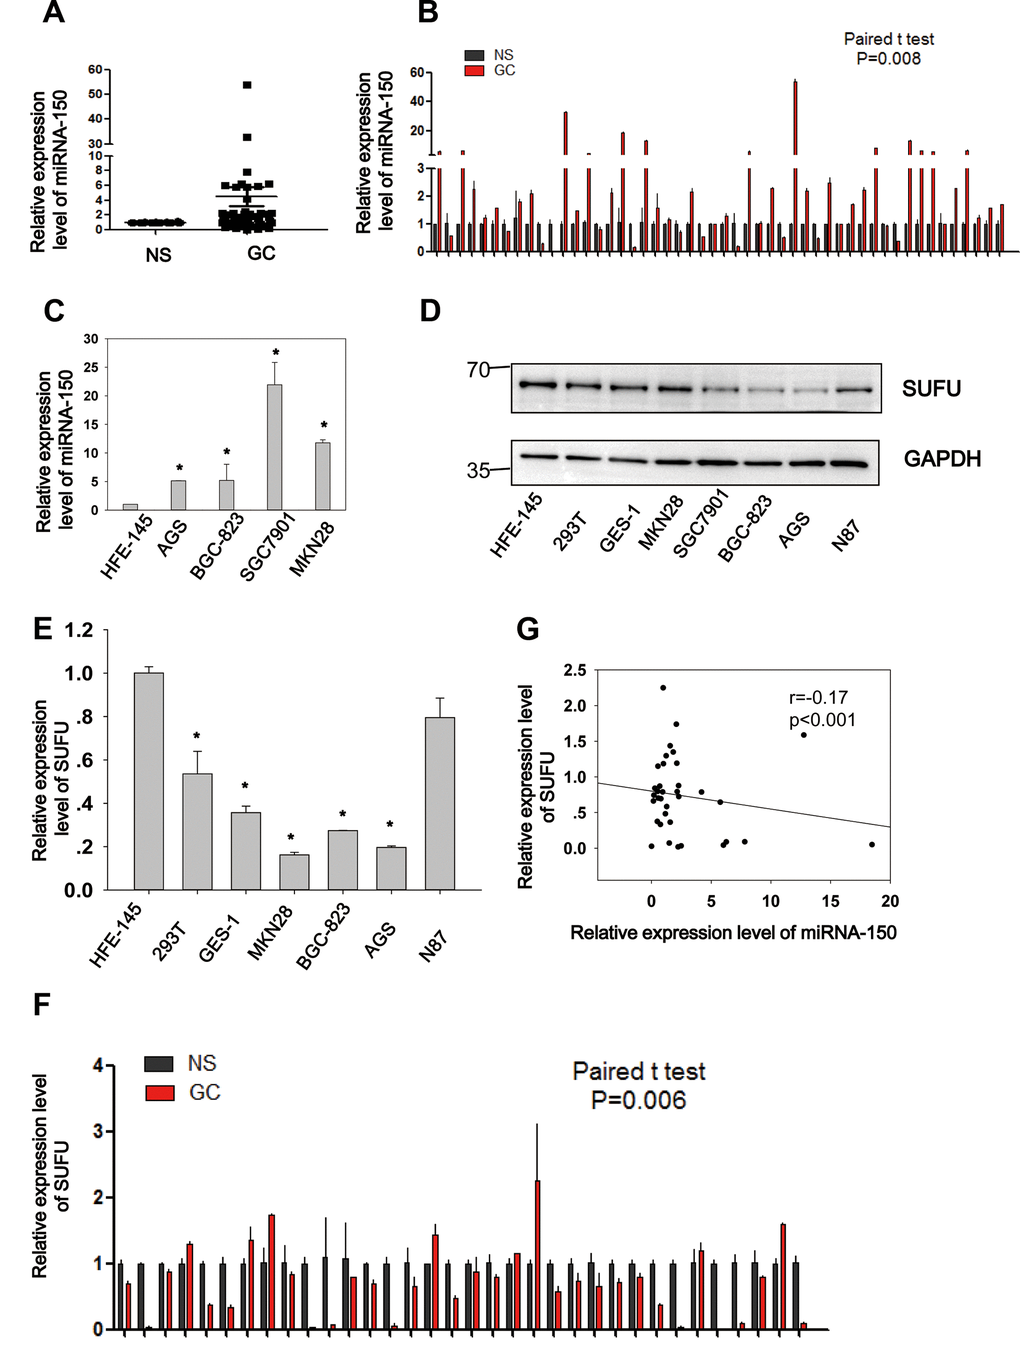 Negative correlation between miRNA-150 and SUFU in GC. MiRNA-150 is highly expressed in GC. The expression of SUFU is downregulated in GC and negatively correlated with the expression of miRNA-150. (A, B) The expression levels of miRNA-150 in 50 paired GC tissues are shown. (C) The expression levels of miRNA-150 in GC cell lines, namely BGC-823,AGS,SGC7901,N87 and MKN28 cells and normal epithelial cells (HFE-145, 293T, GES-1) were determined. (D, E) The expression levels of SUFU in GC cell lines were determined using western blotting and qPCR. (F) The expression levels of SUFU in 34 paired GC samples are shown. (G) A correlation analysis of miRNA-150 and SUFU mRNA levels was performed in 34 paired GC tissues.